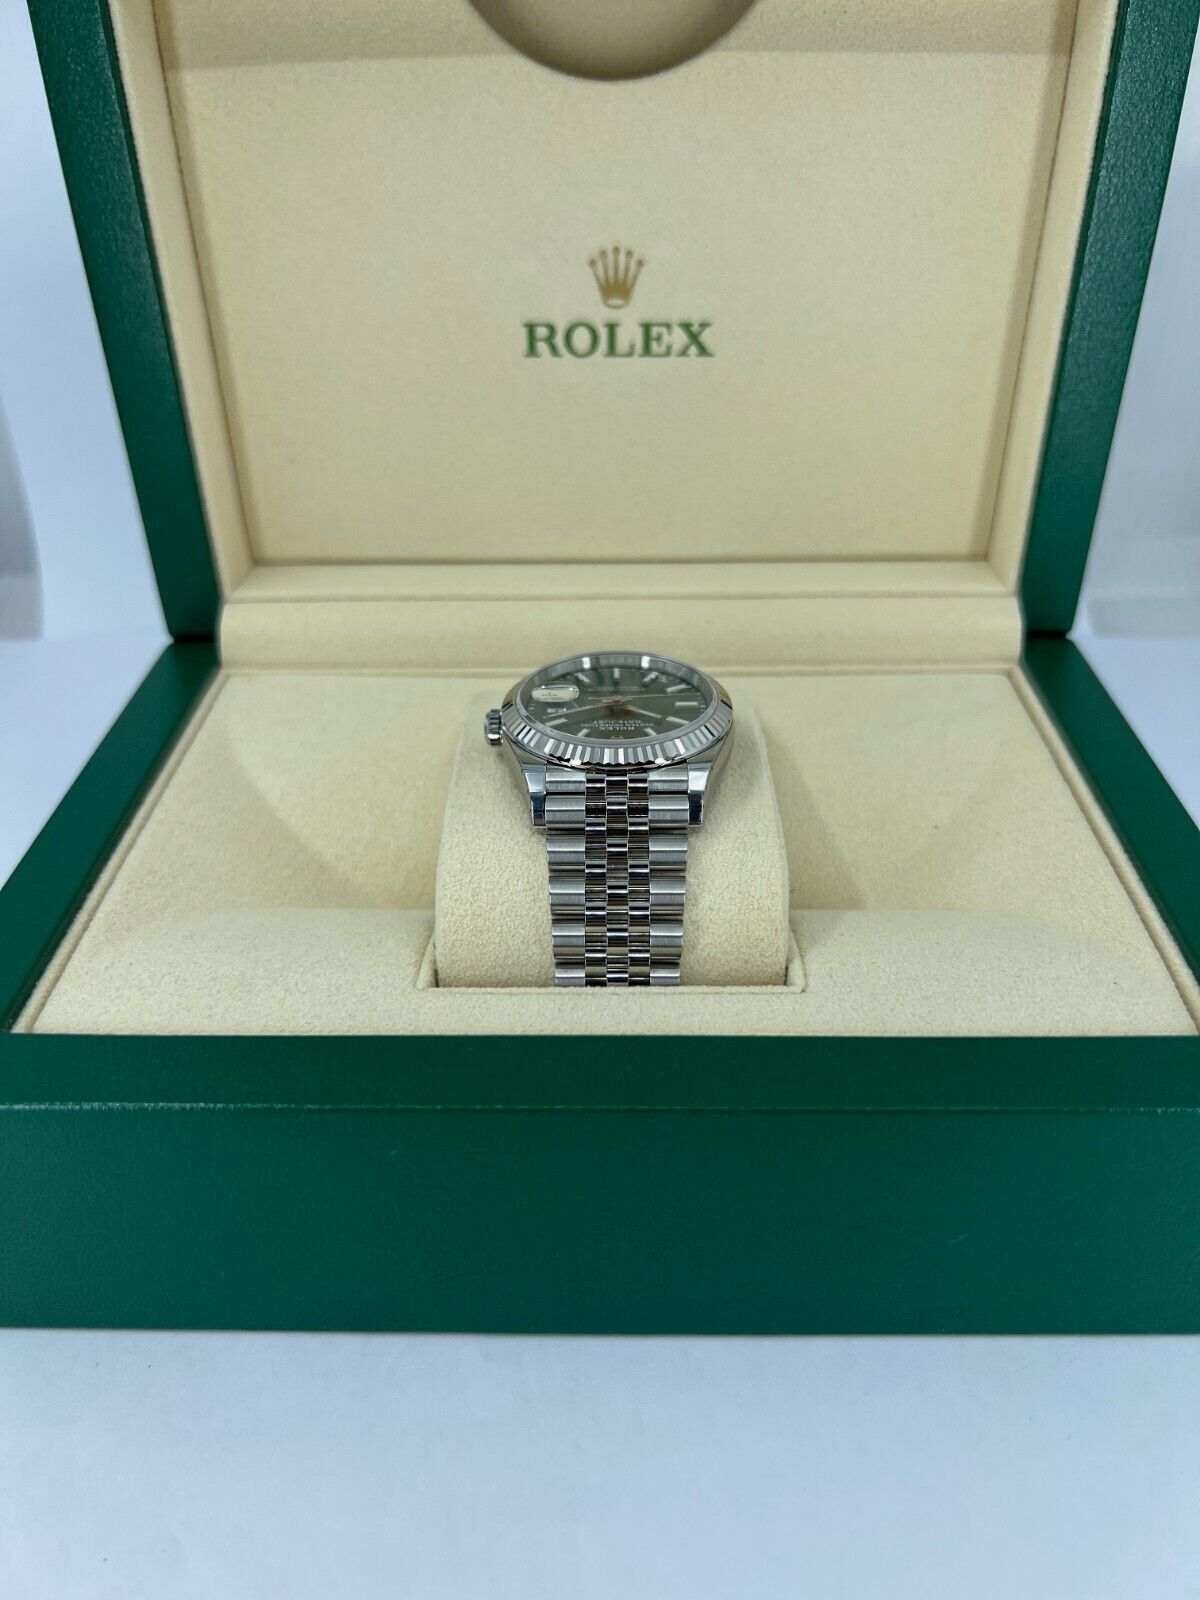 Rolex, Datejust 36, Oystersteel and 18k White Gold, 36mm, Green Mint Dial, Fluted, Jubilee, Ref# 126234-0051, Side 1